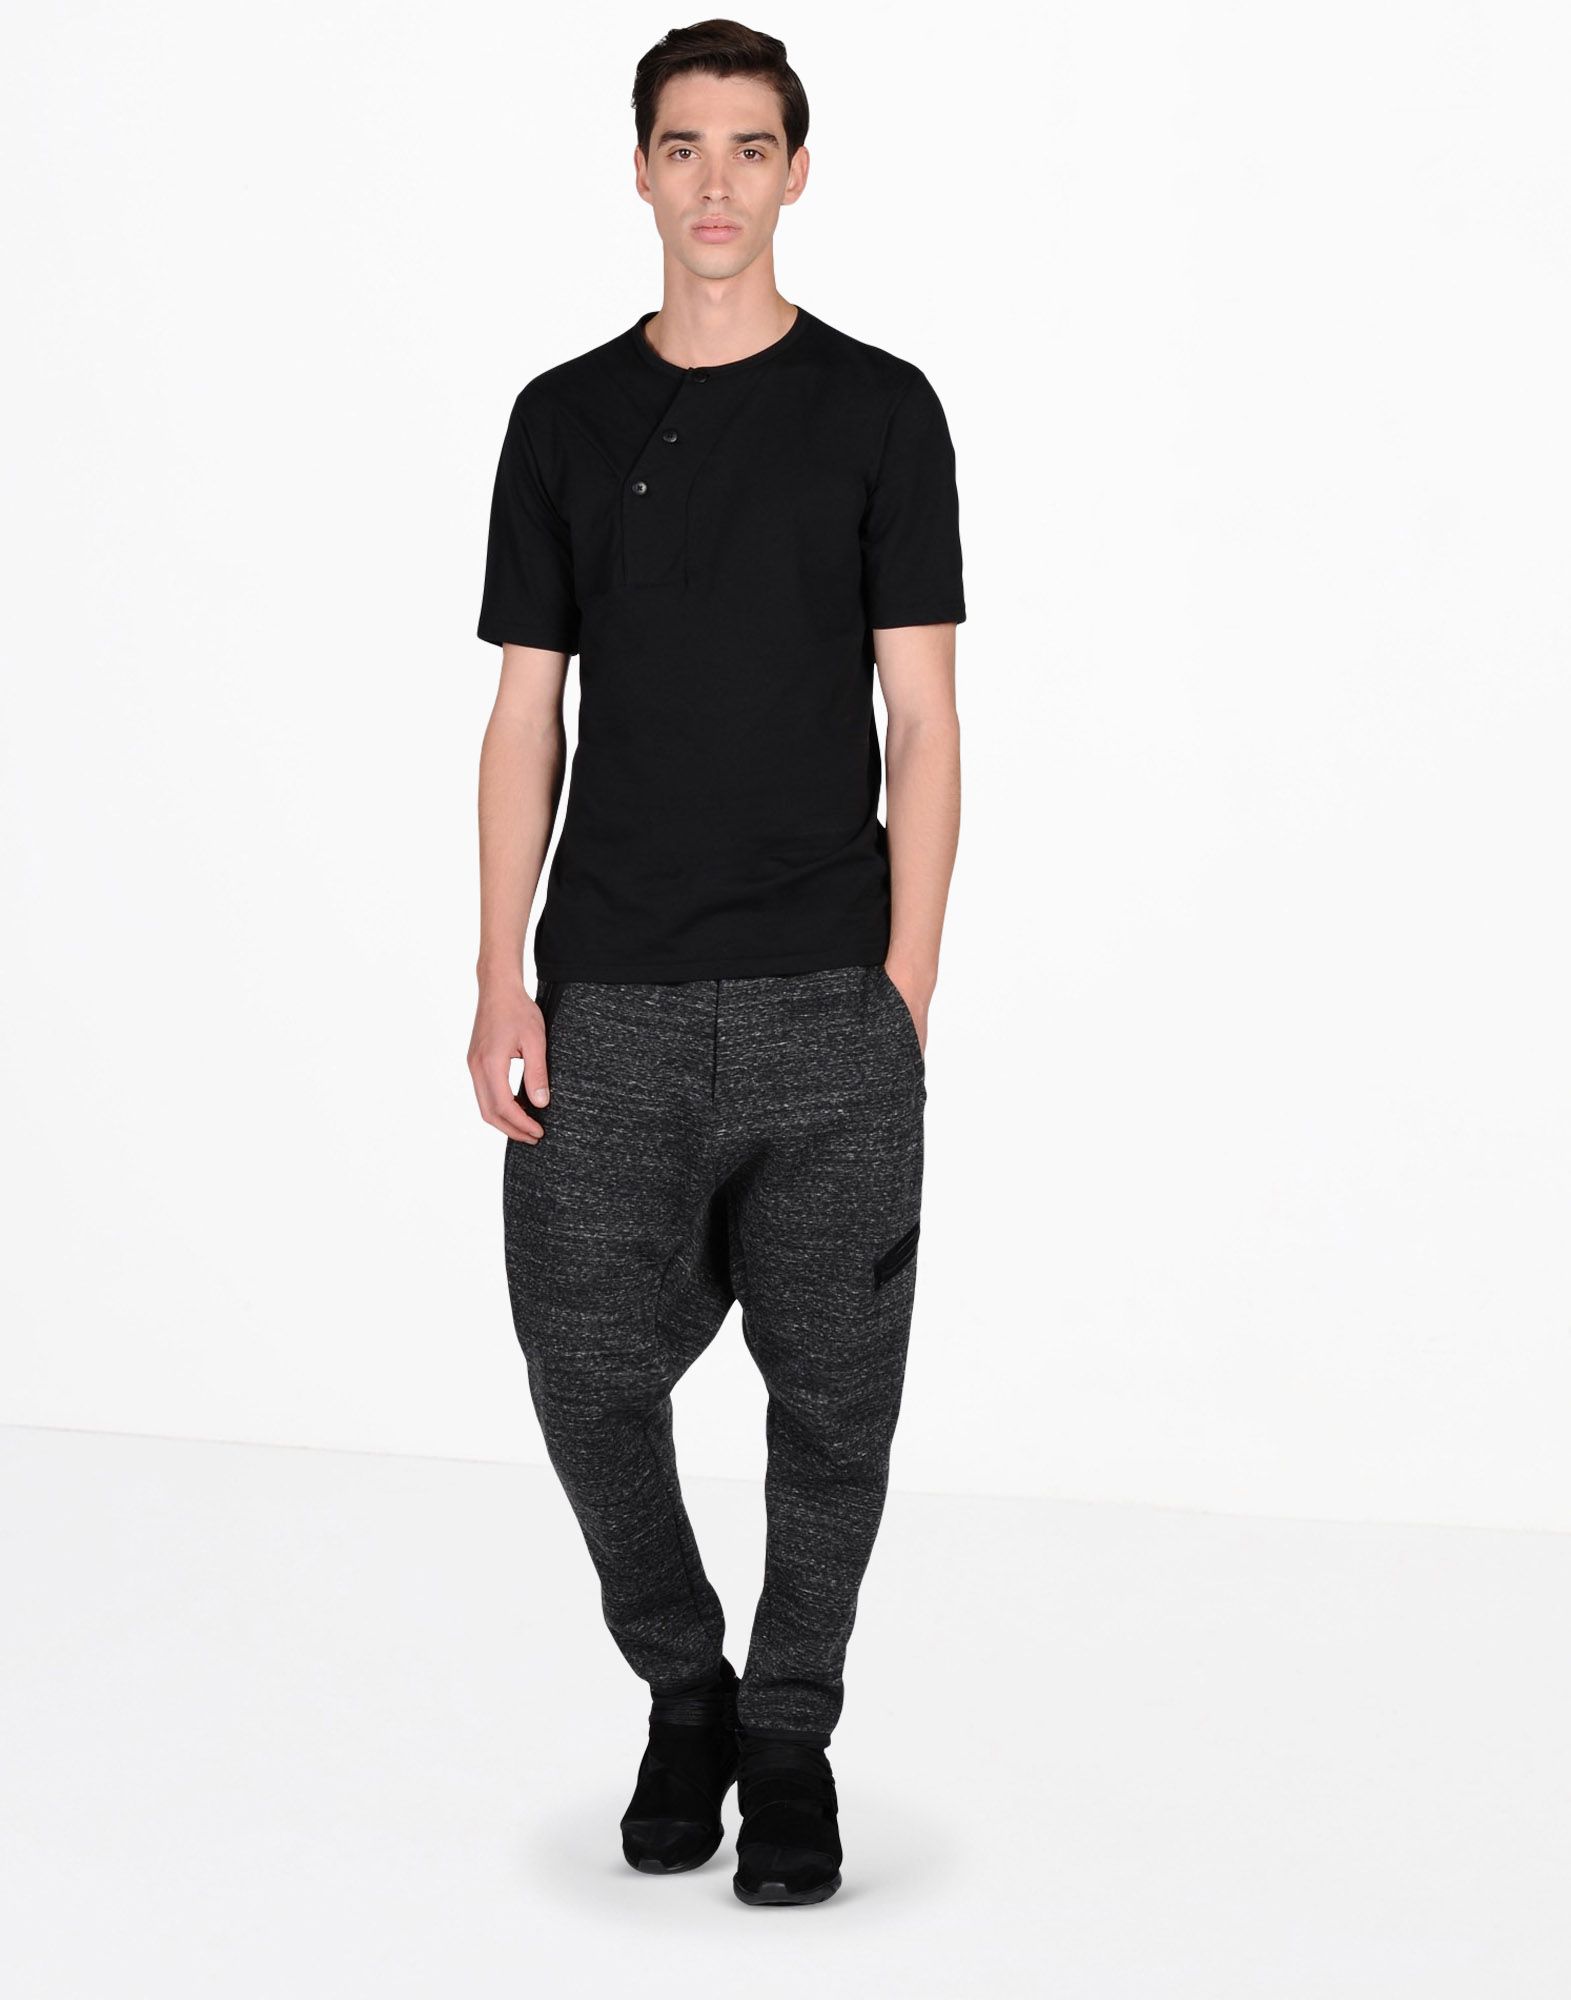 Y 3 FUTURE SPORT PANT for Men | Adidas Y-3 Official Store